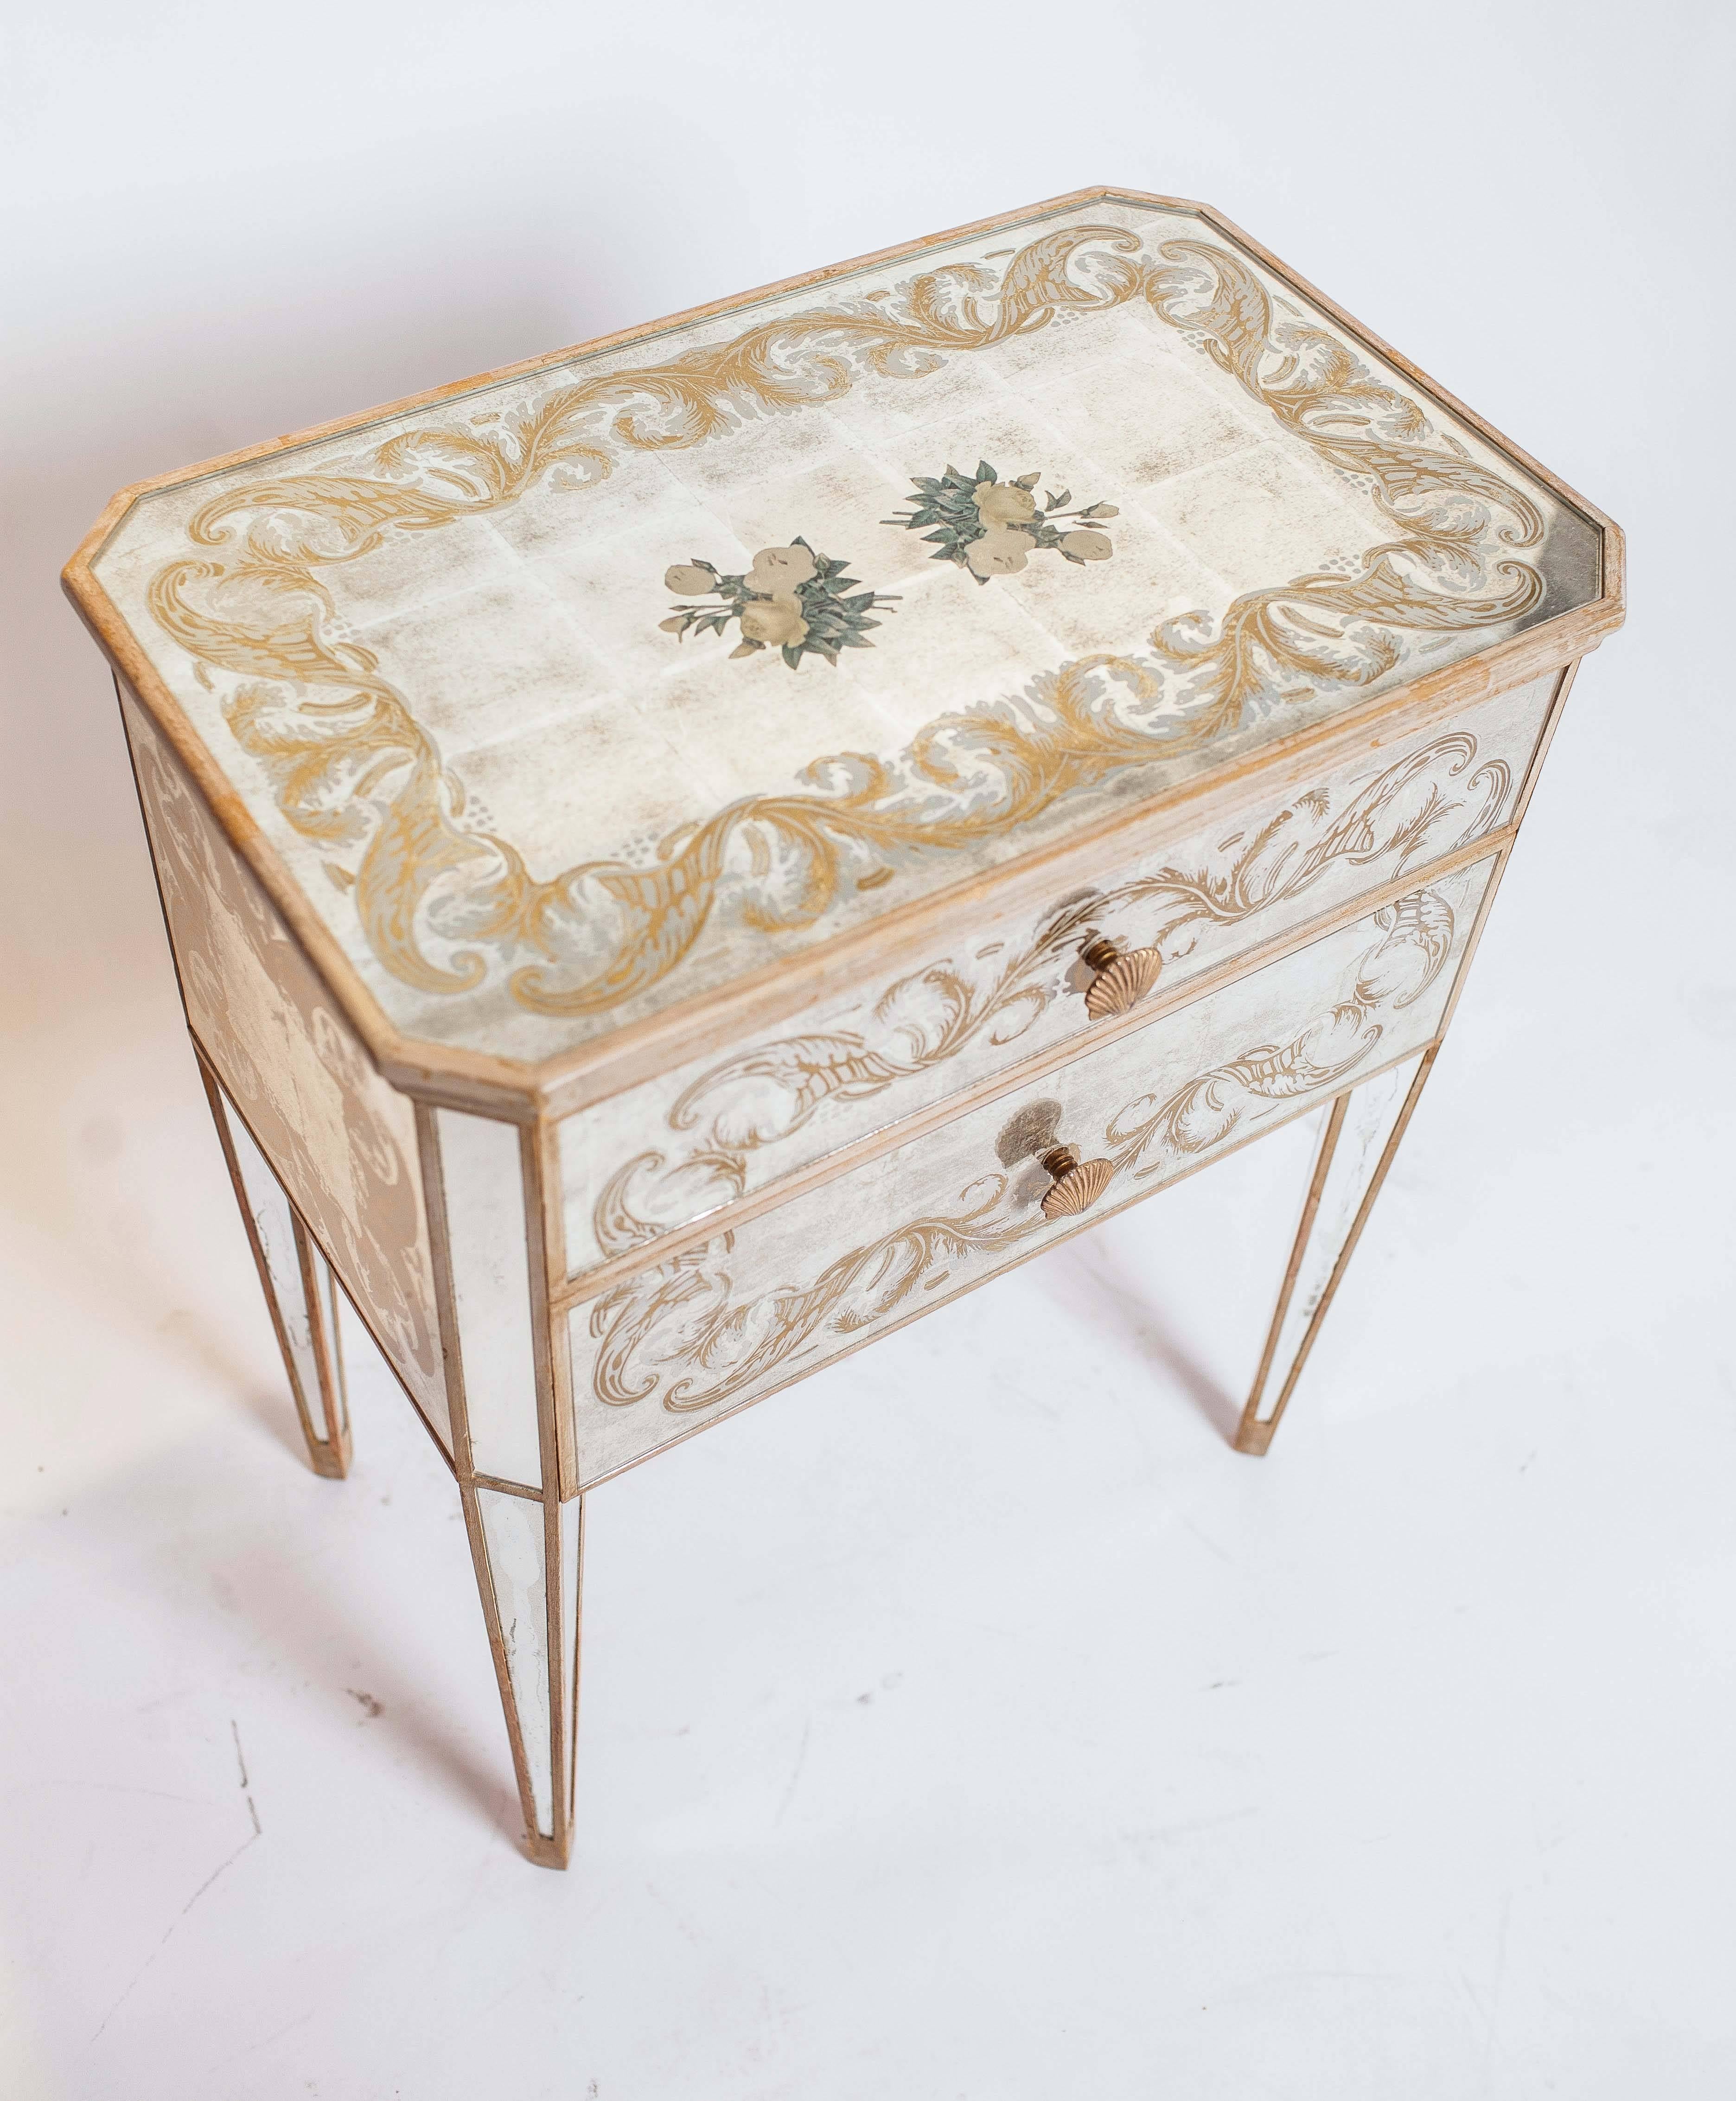 Side tables have two drawers and are finished on all sides.  The hardware is a brass shell motif.  Silver leaf decoupage.  